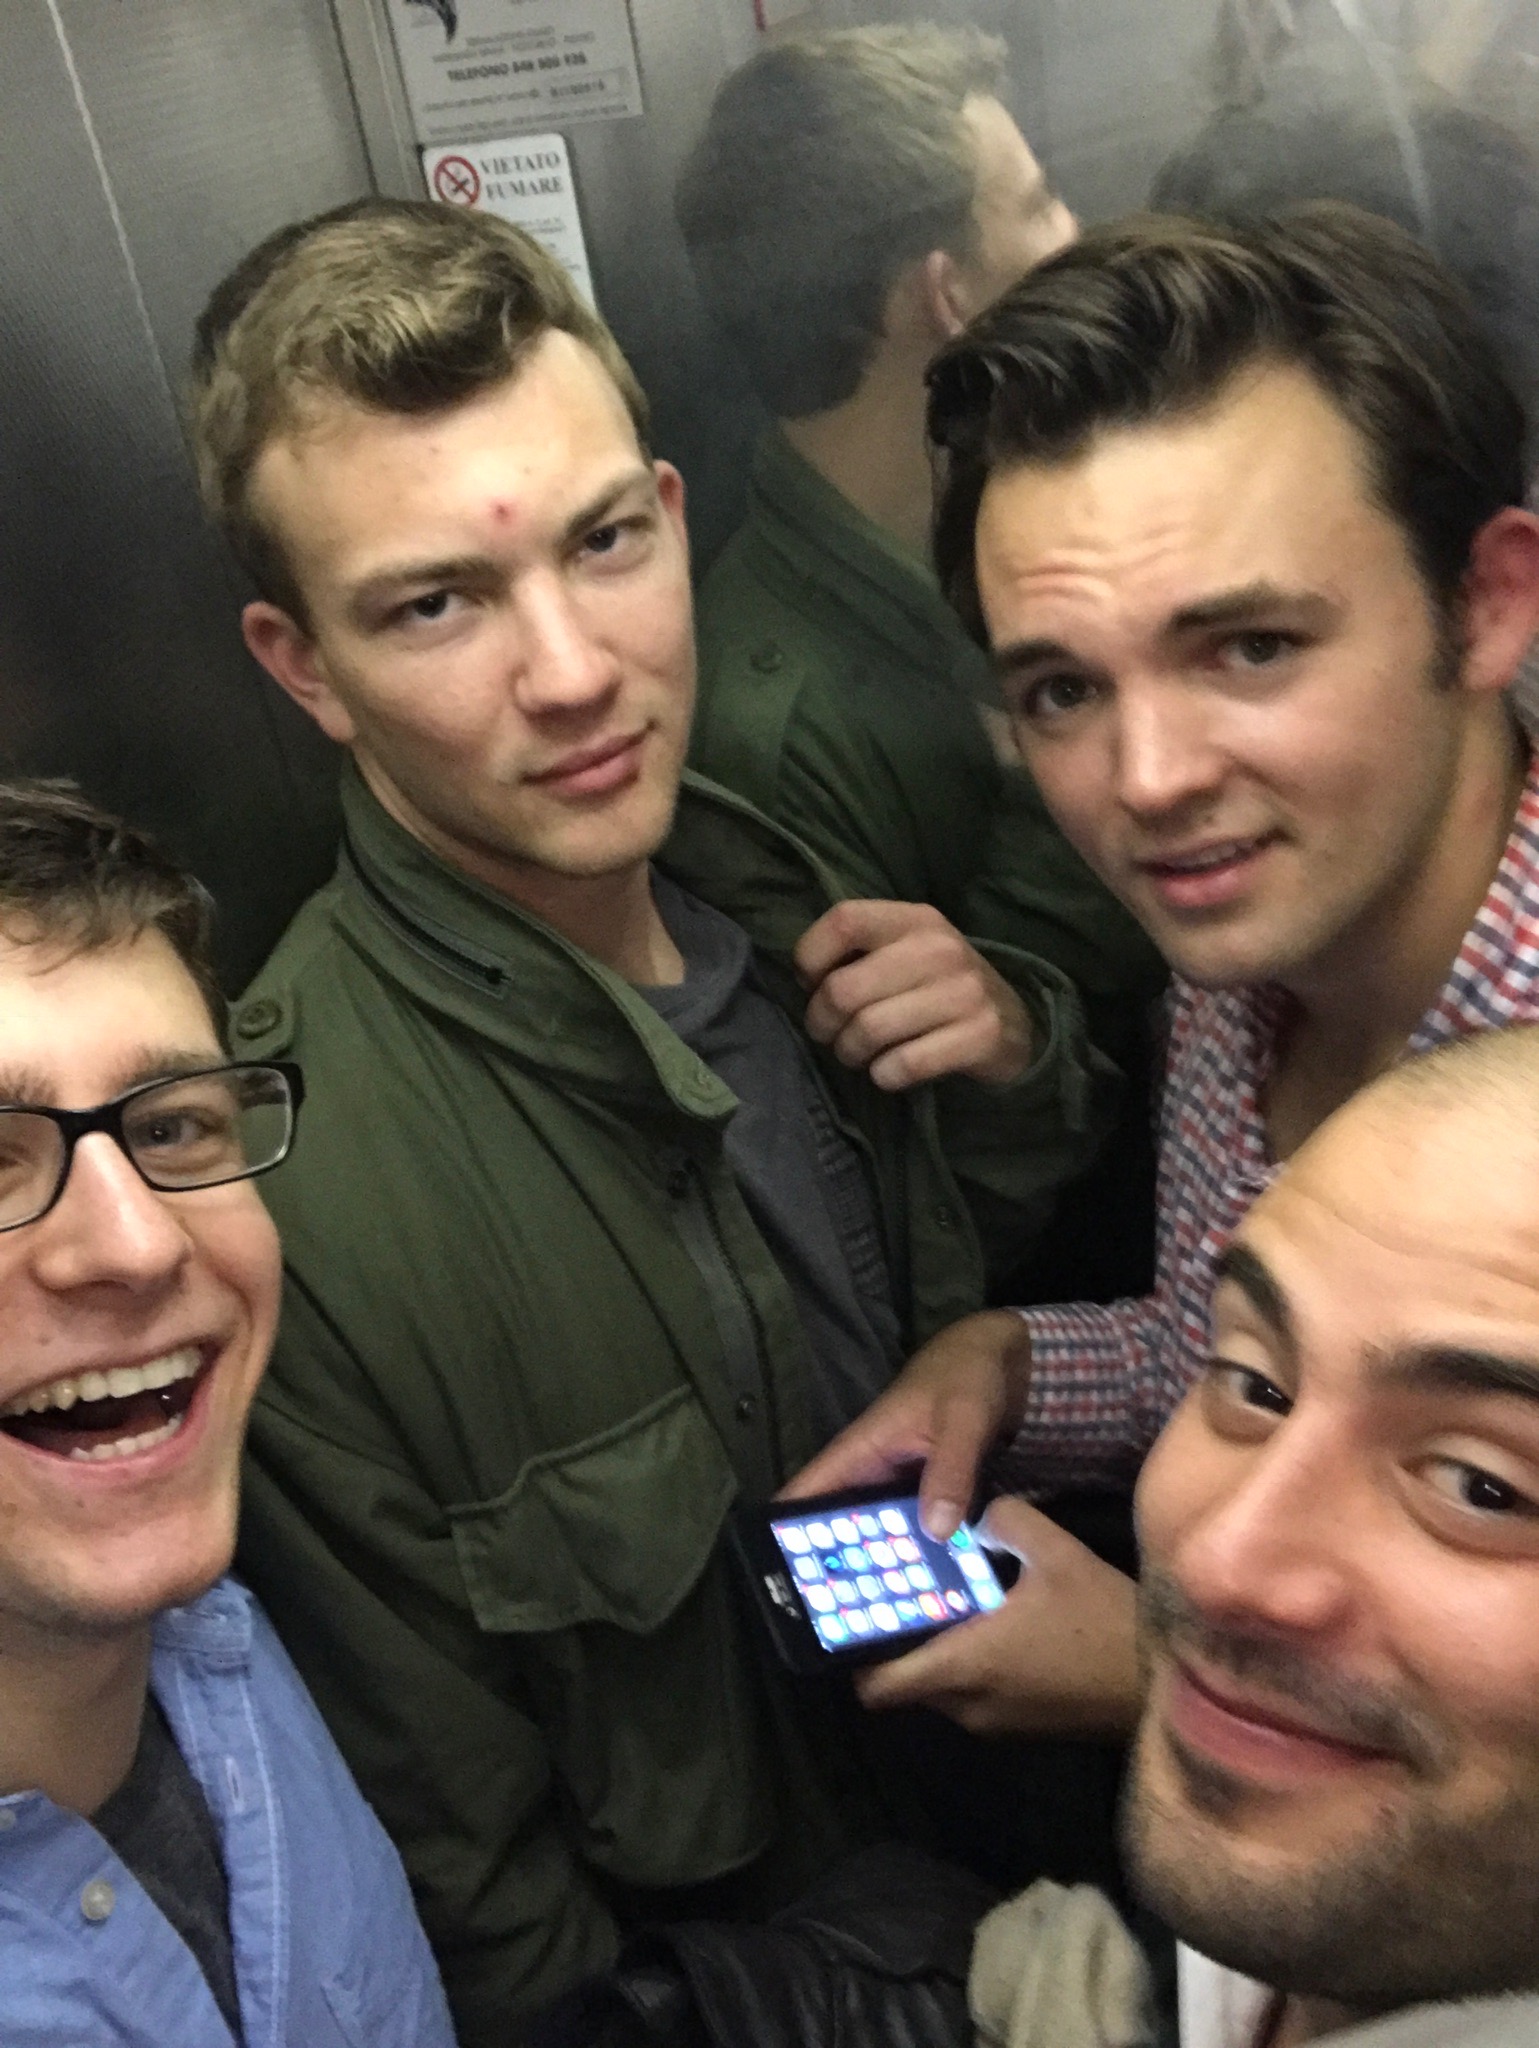 A happy group in the elevator